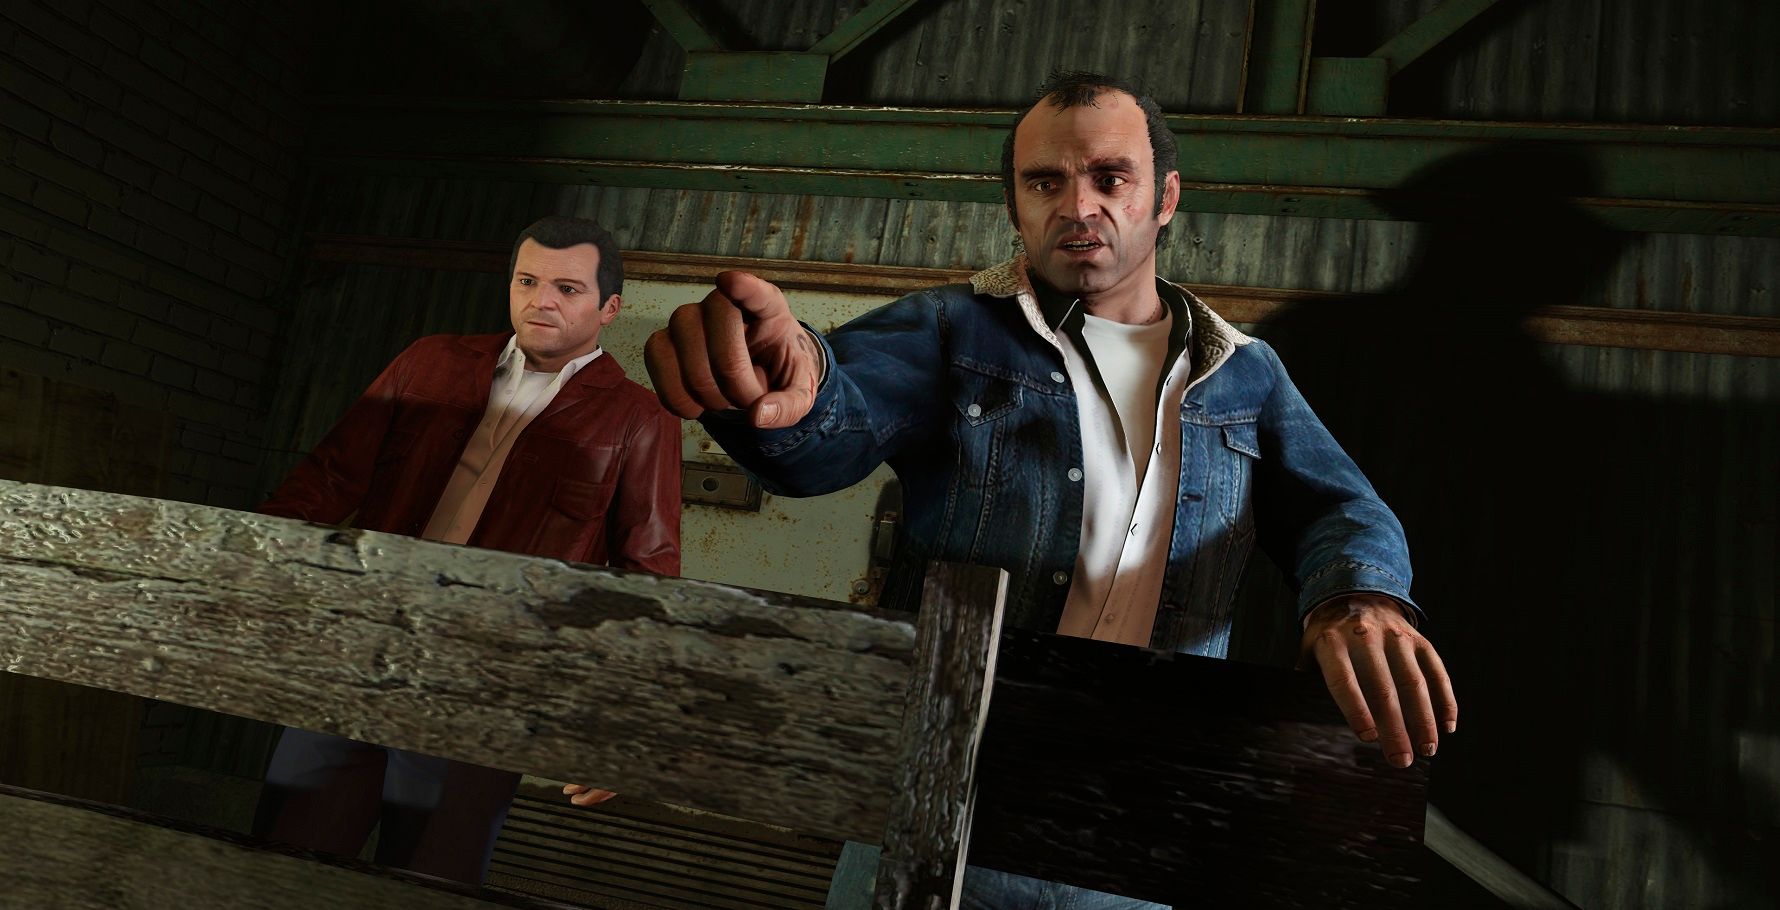 Grand Theft Auto 6 7 Characters We Want To Return (And 3 We Don't Want